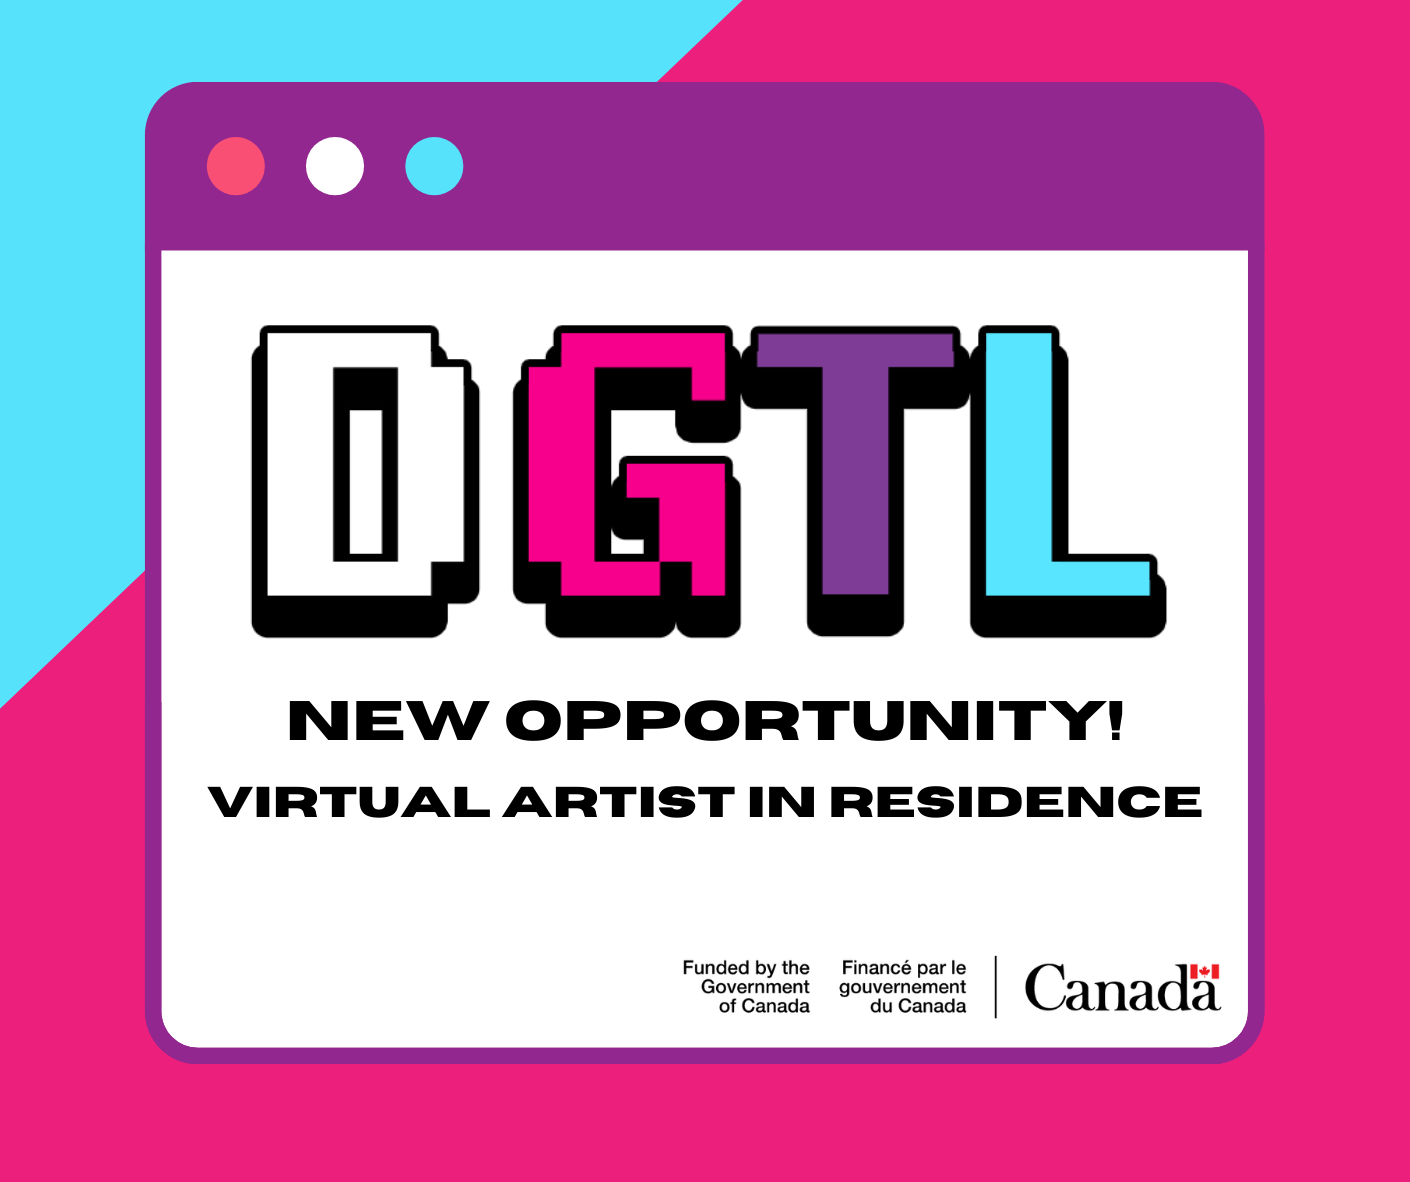 New Opportunity for a Virtual Resident Artist/Intern for DGTL Creator North. Apply now!